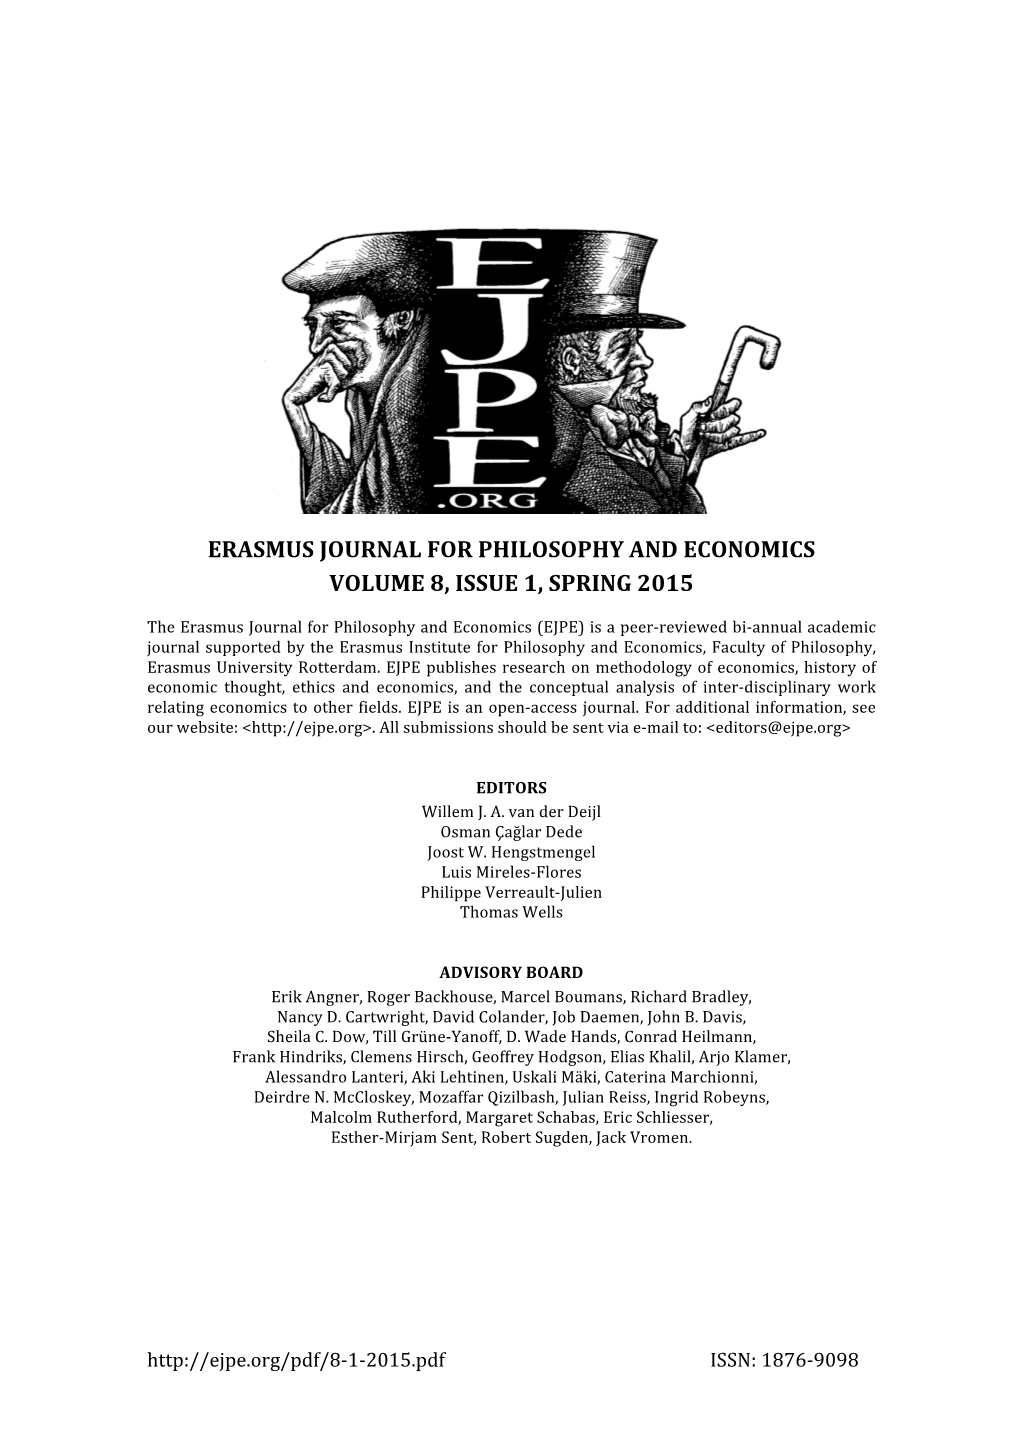 Erasmus Journal for Philosophy and Economics Volume 8, Issue 1, Spring 2015